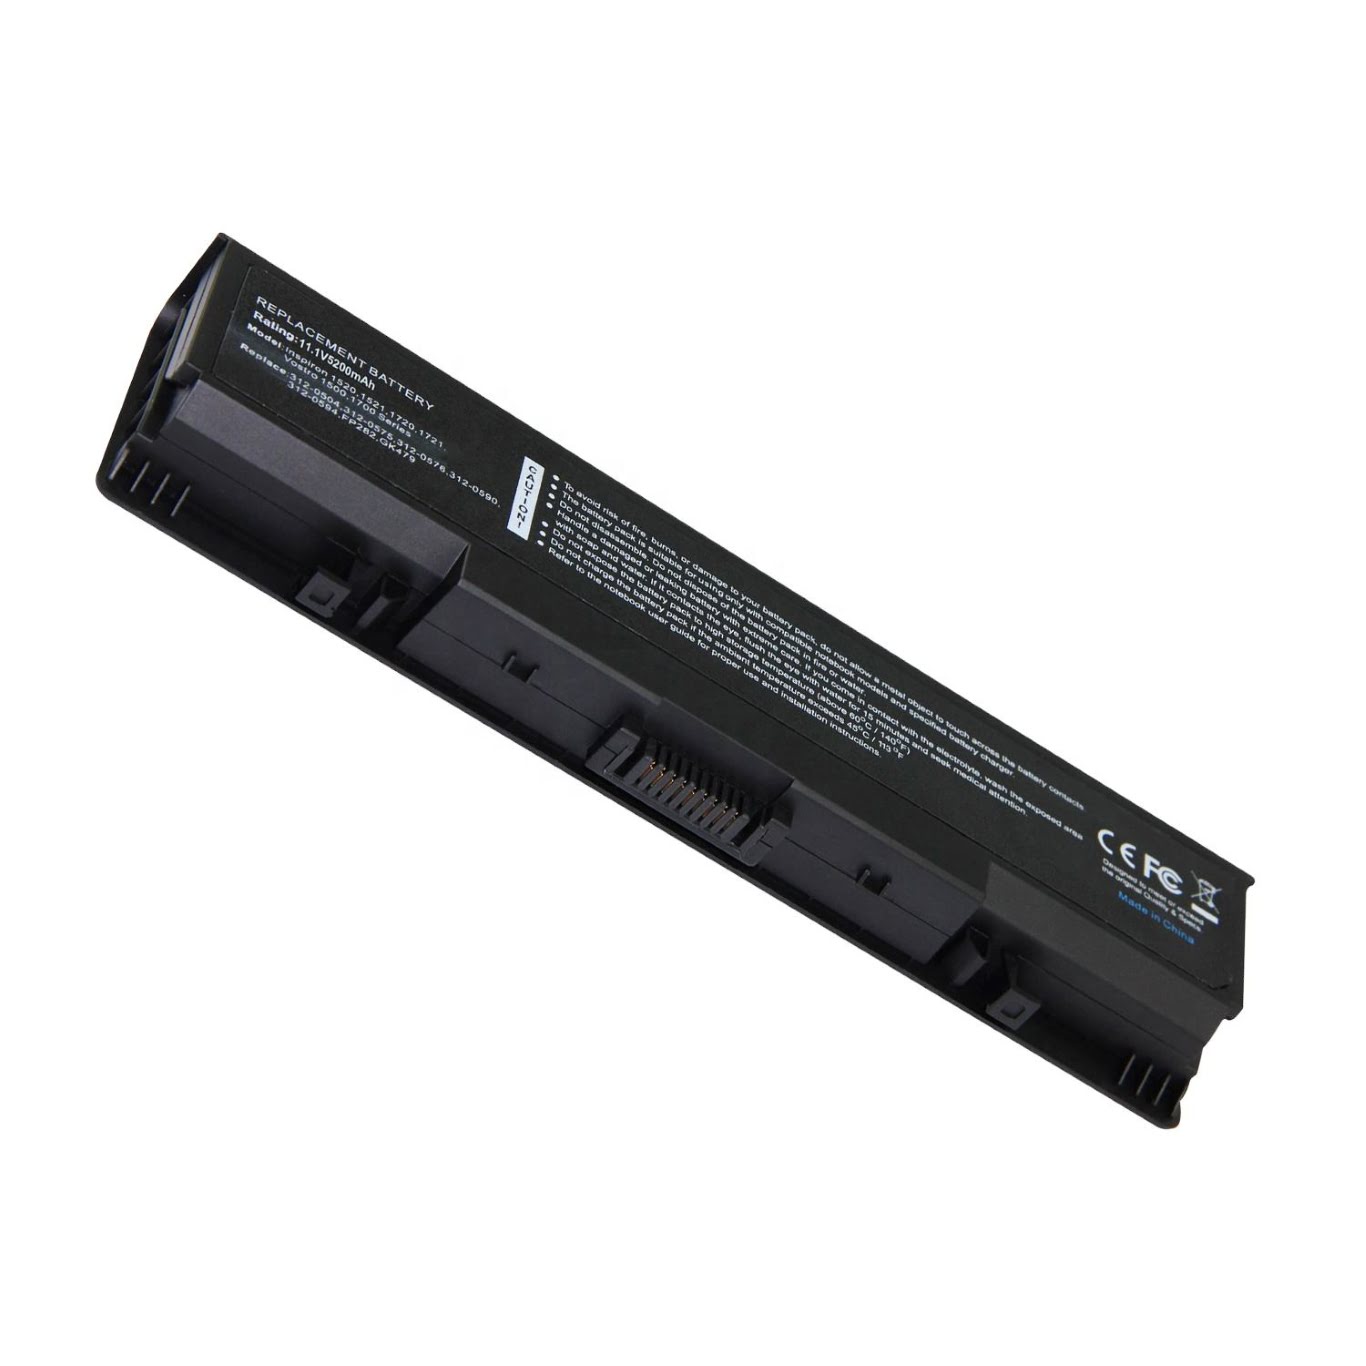 Dell 0dy375, 312-0590 Laptop Battery For Inspiron 1520, Inspiron 1521 replacement